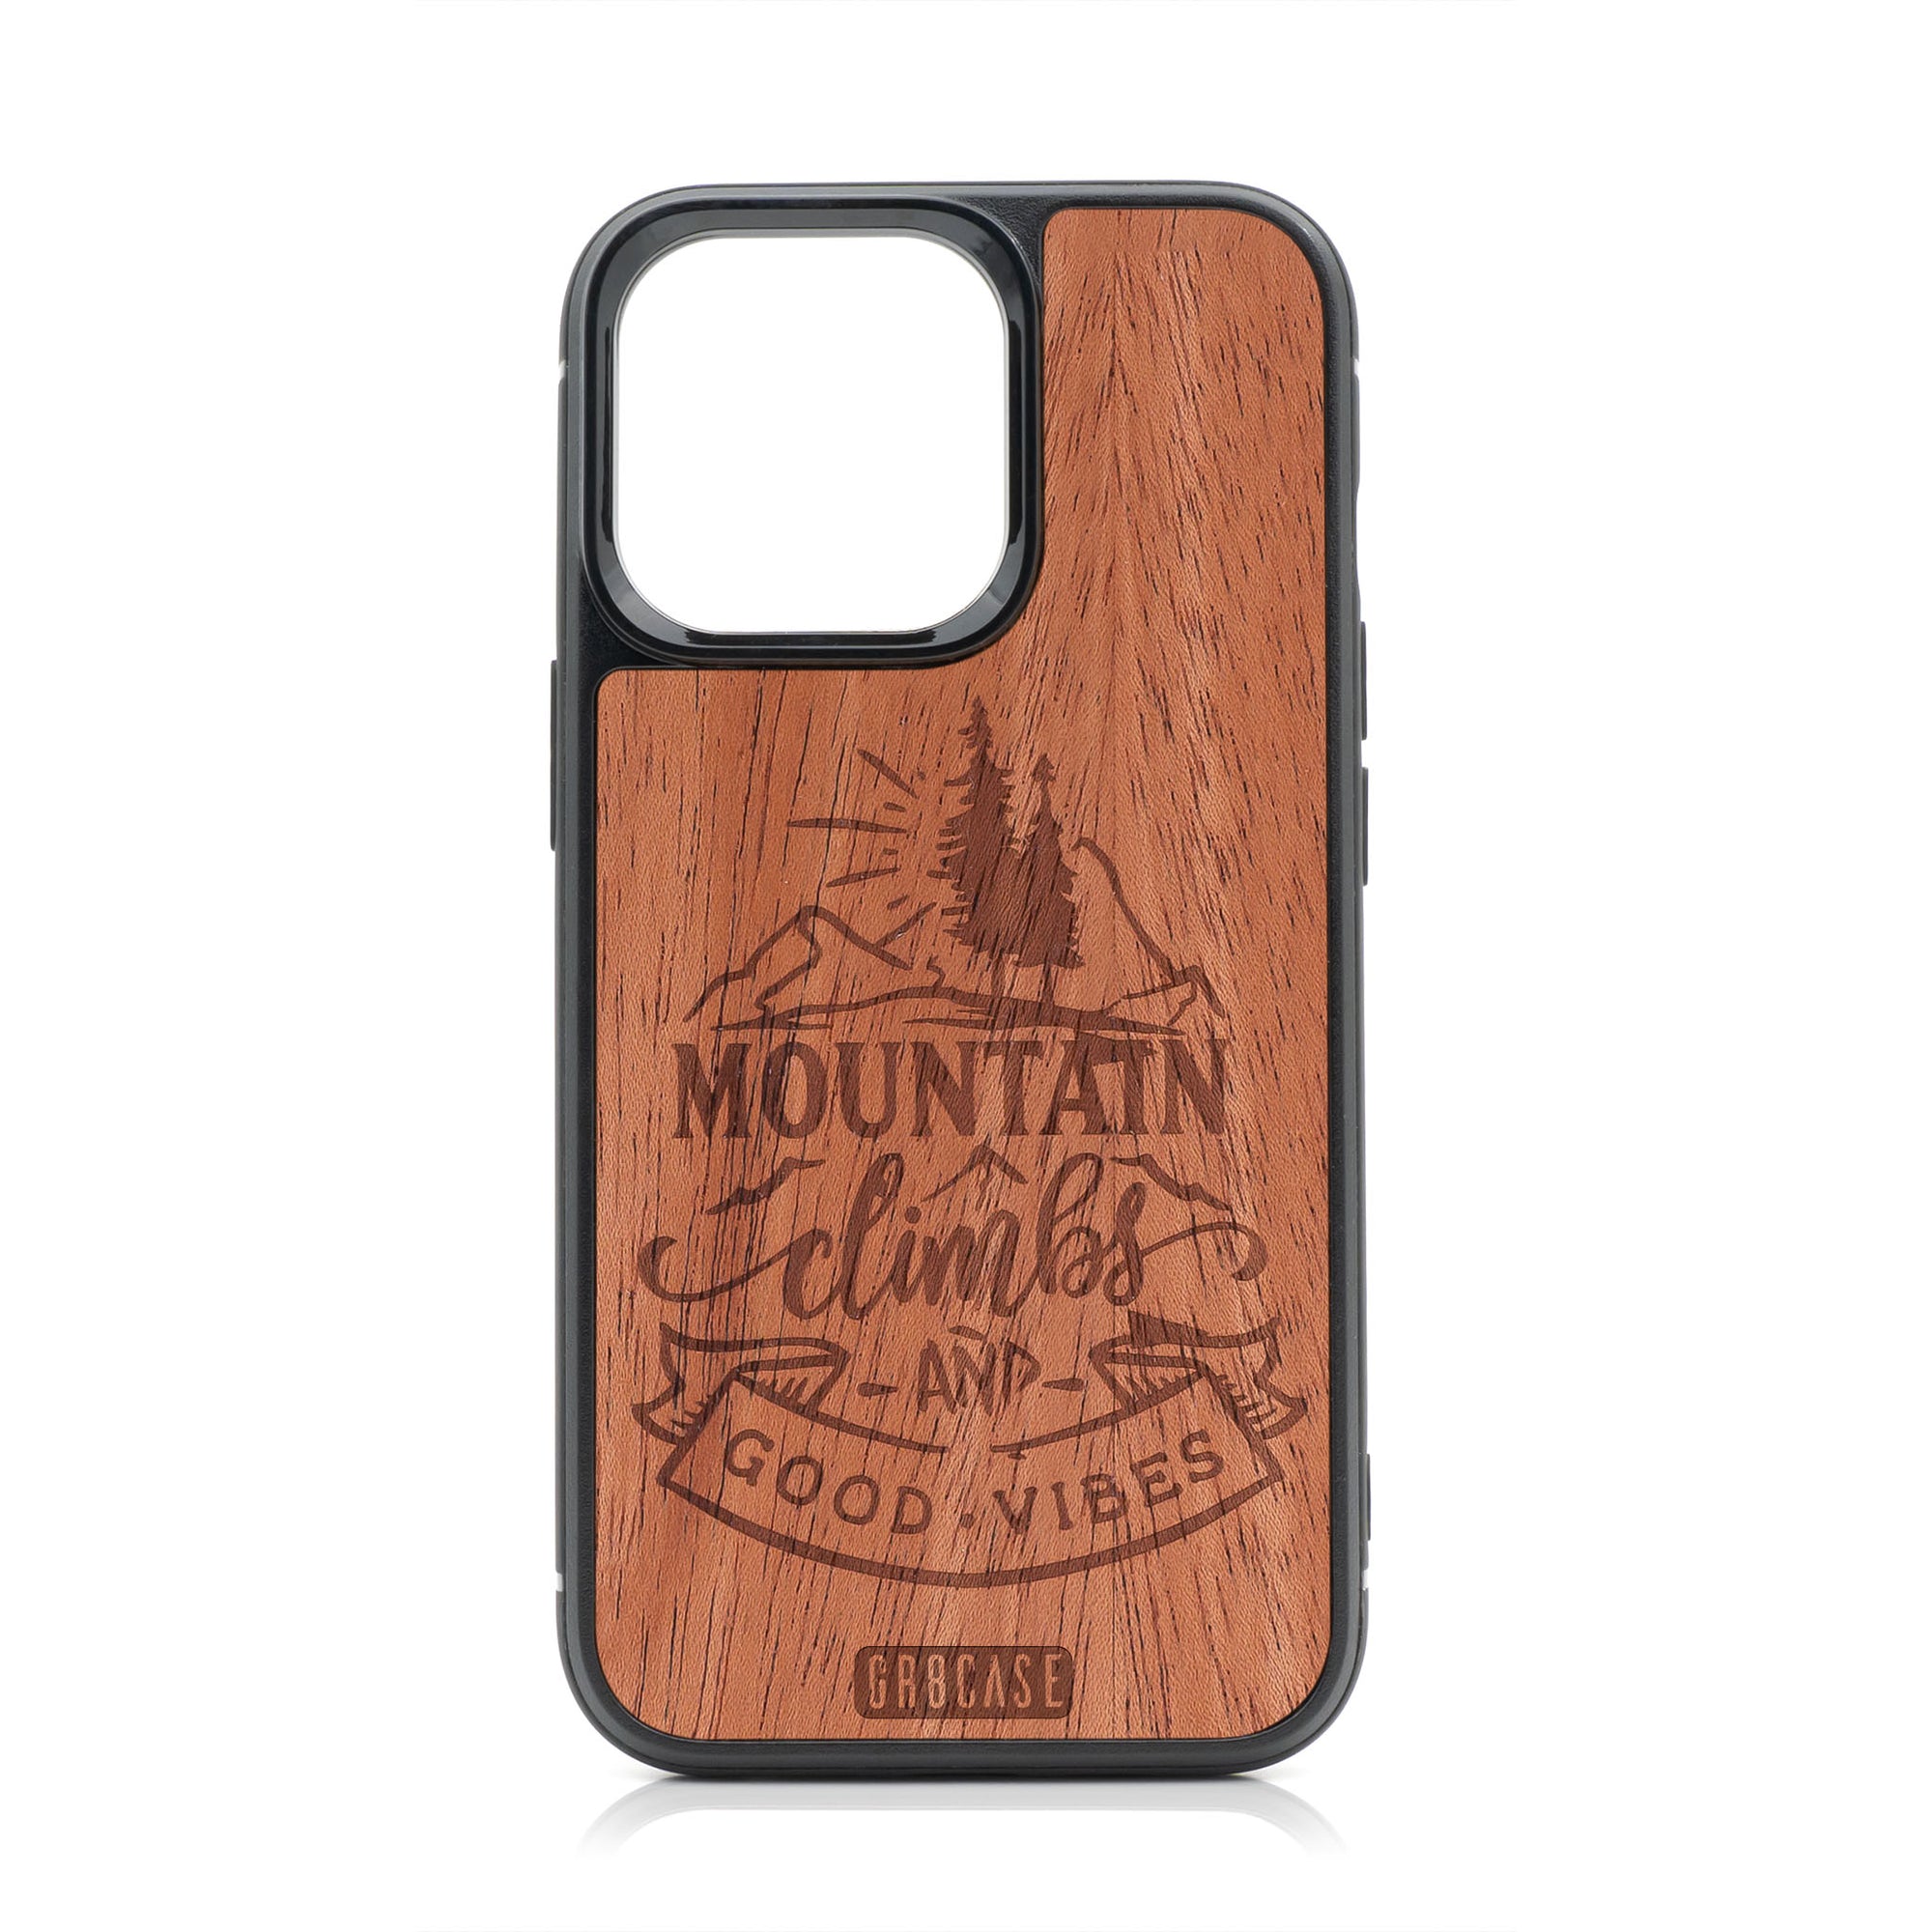 Mountain Climb Good Vibes Design Wood Case For iPhone 13 Pro